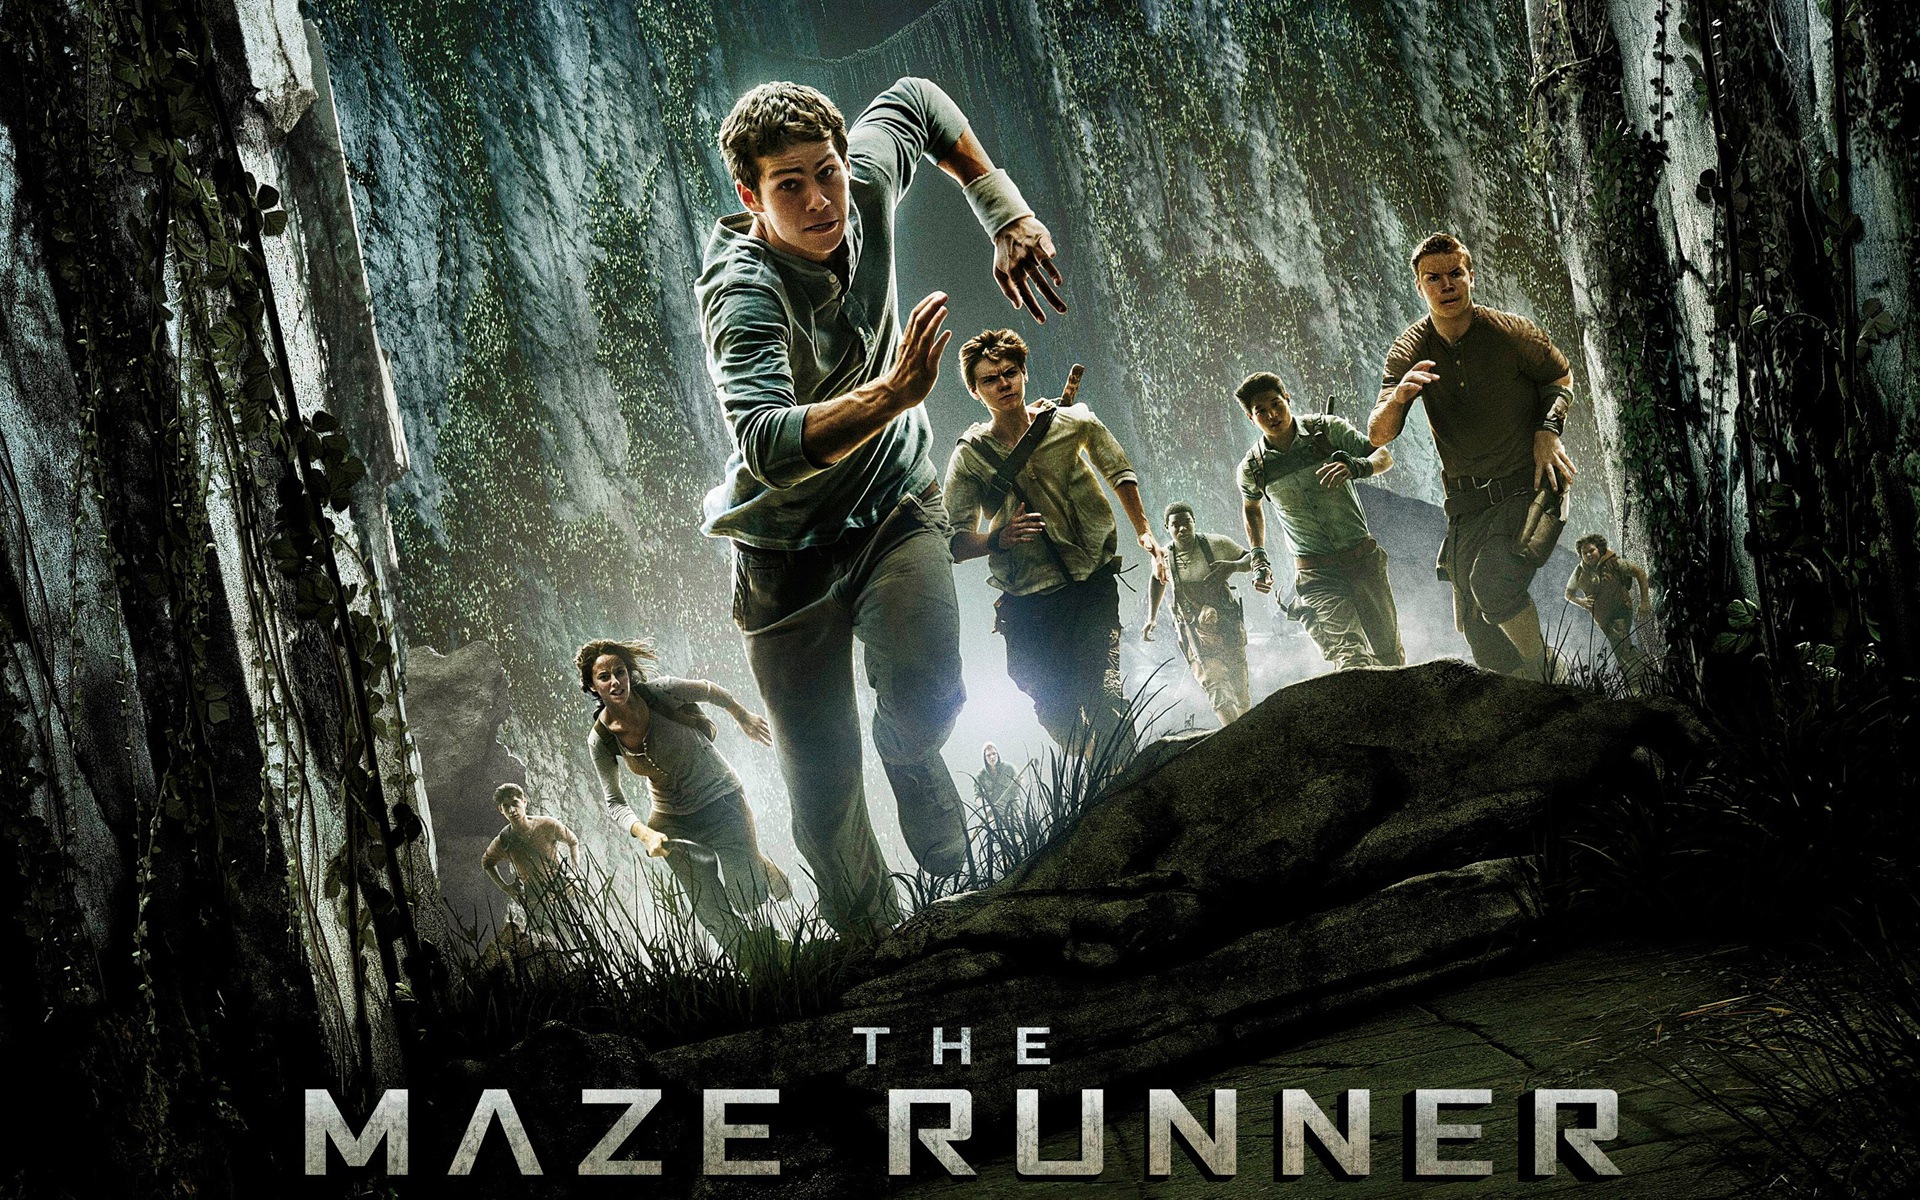 The Maze Runner HD movie wallpapers #2 - 1920x1200